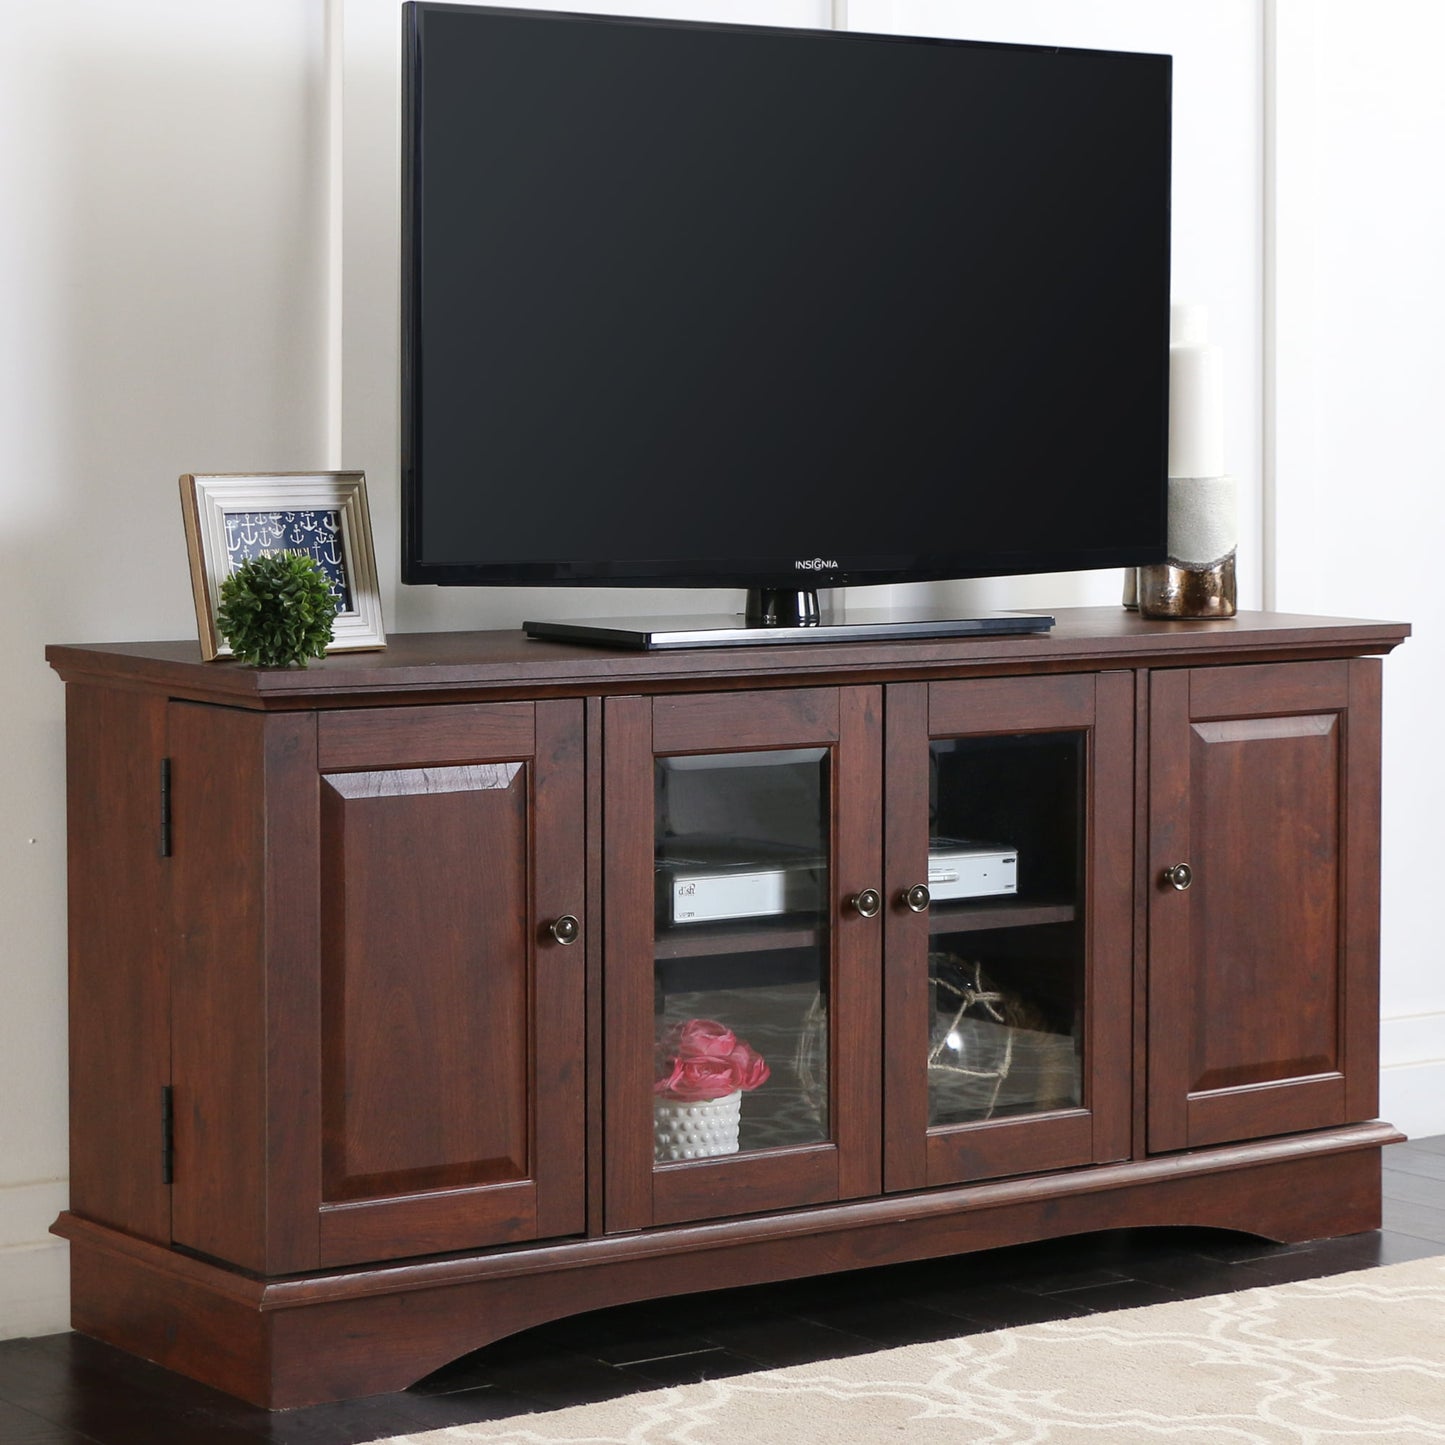 Walker Edison Wood TV Stand for TVs up to 55", Espresso